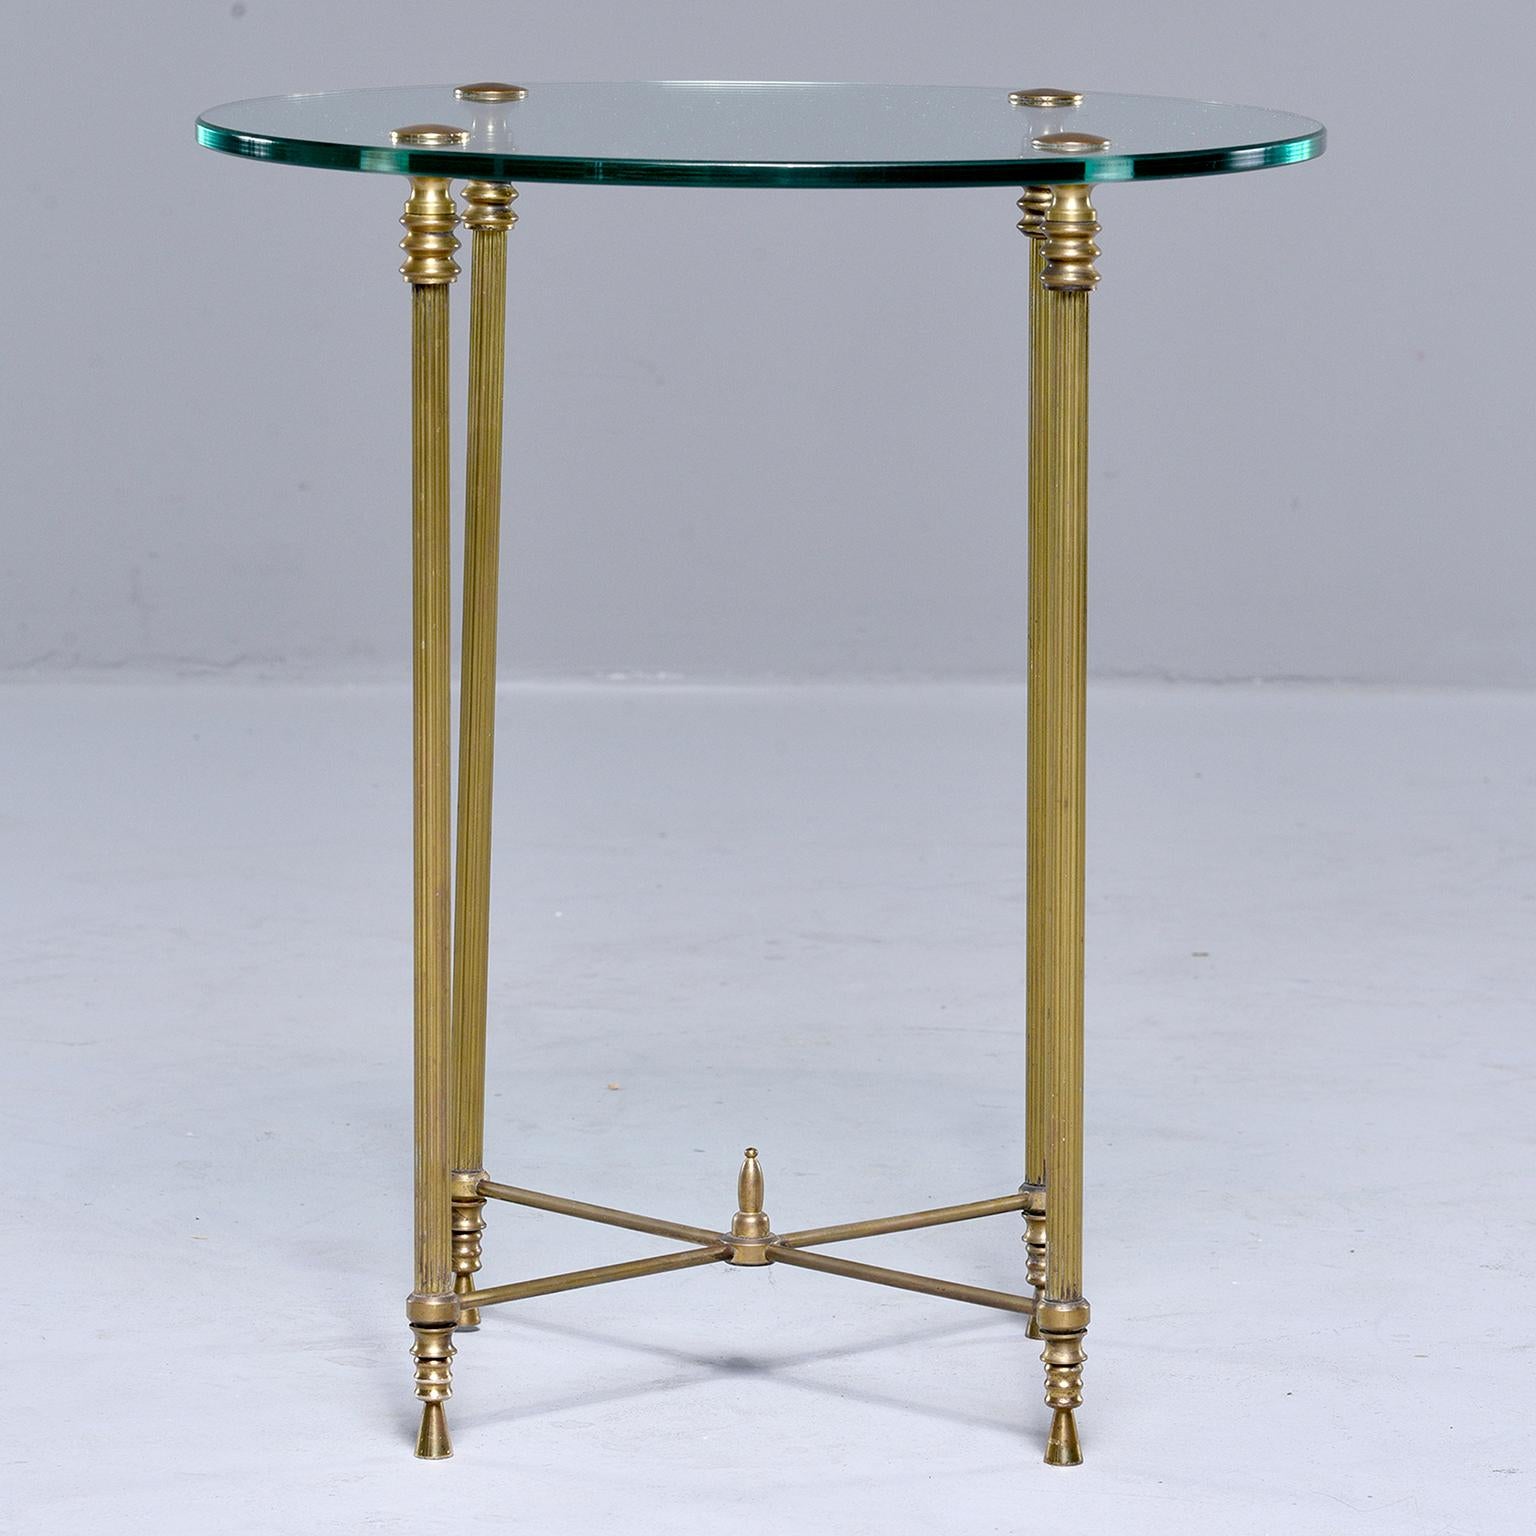 Small round side table found in France, circa 1960s. Round glass tabletop, x-form brass stretchers with a center finial and reeded brass legs. Unknown maker.